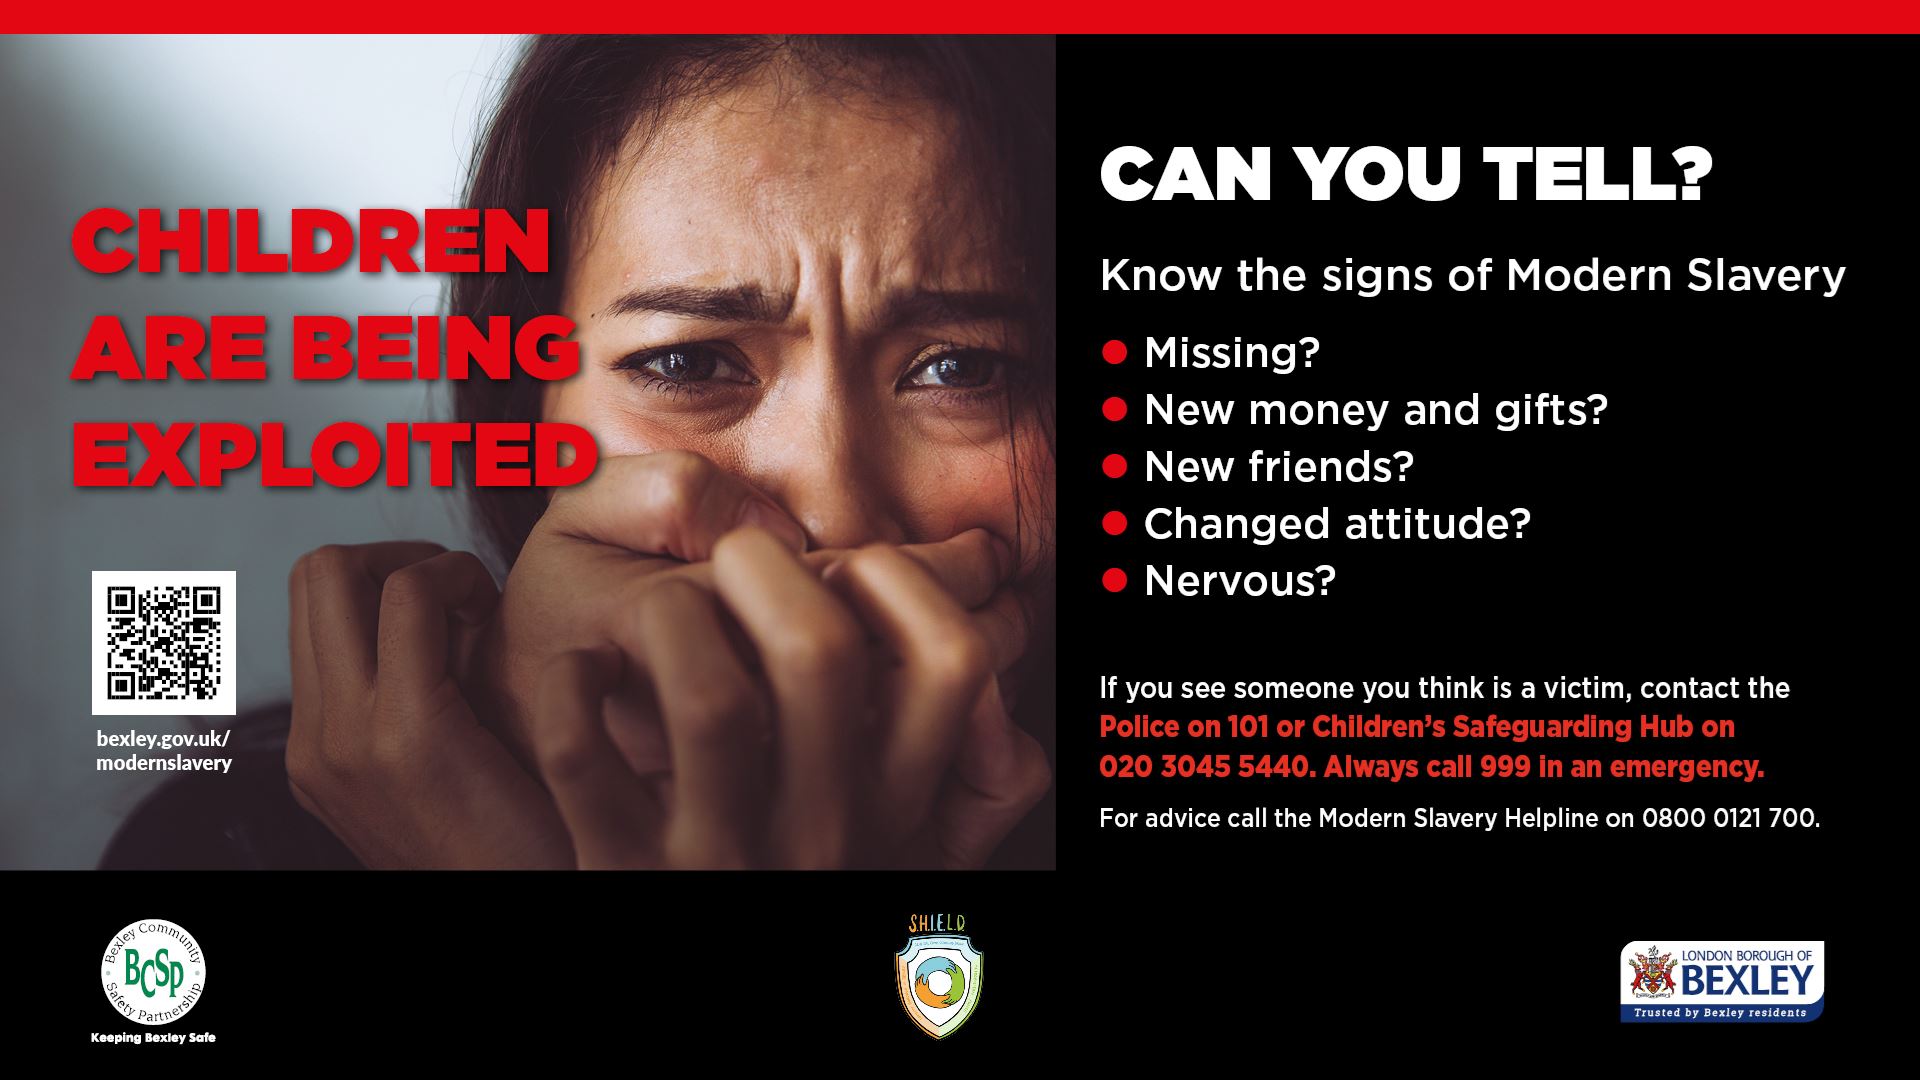 A poster advising people to know the signs of modern slavery and report it if you see a victim